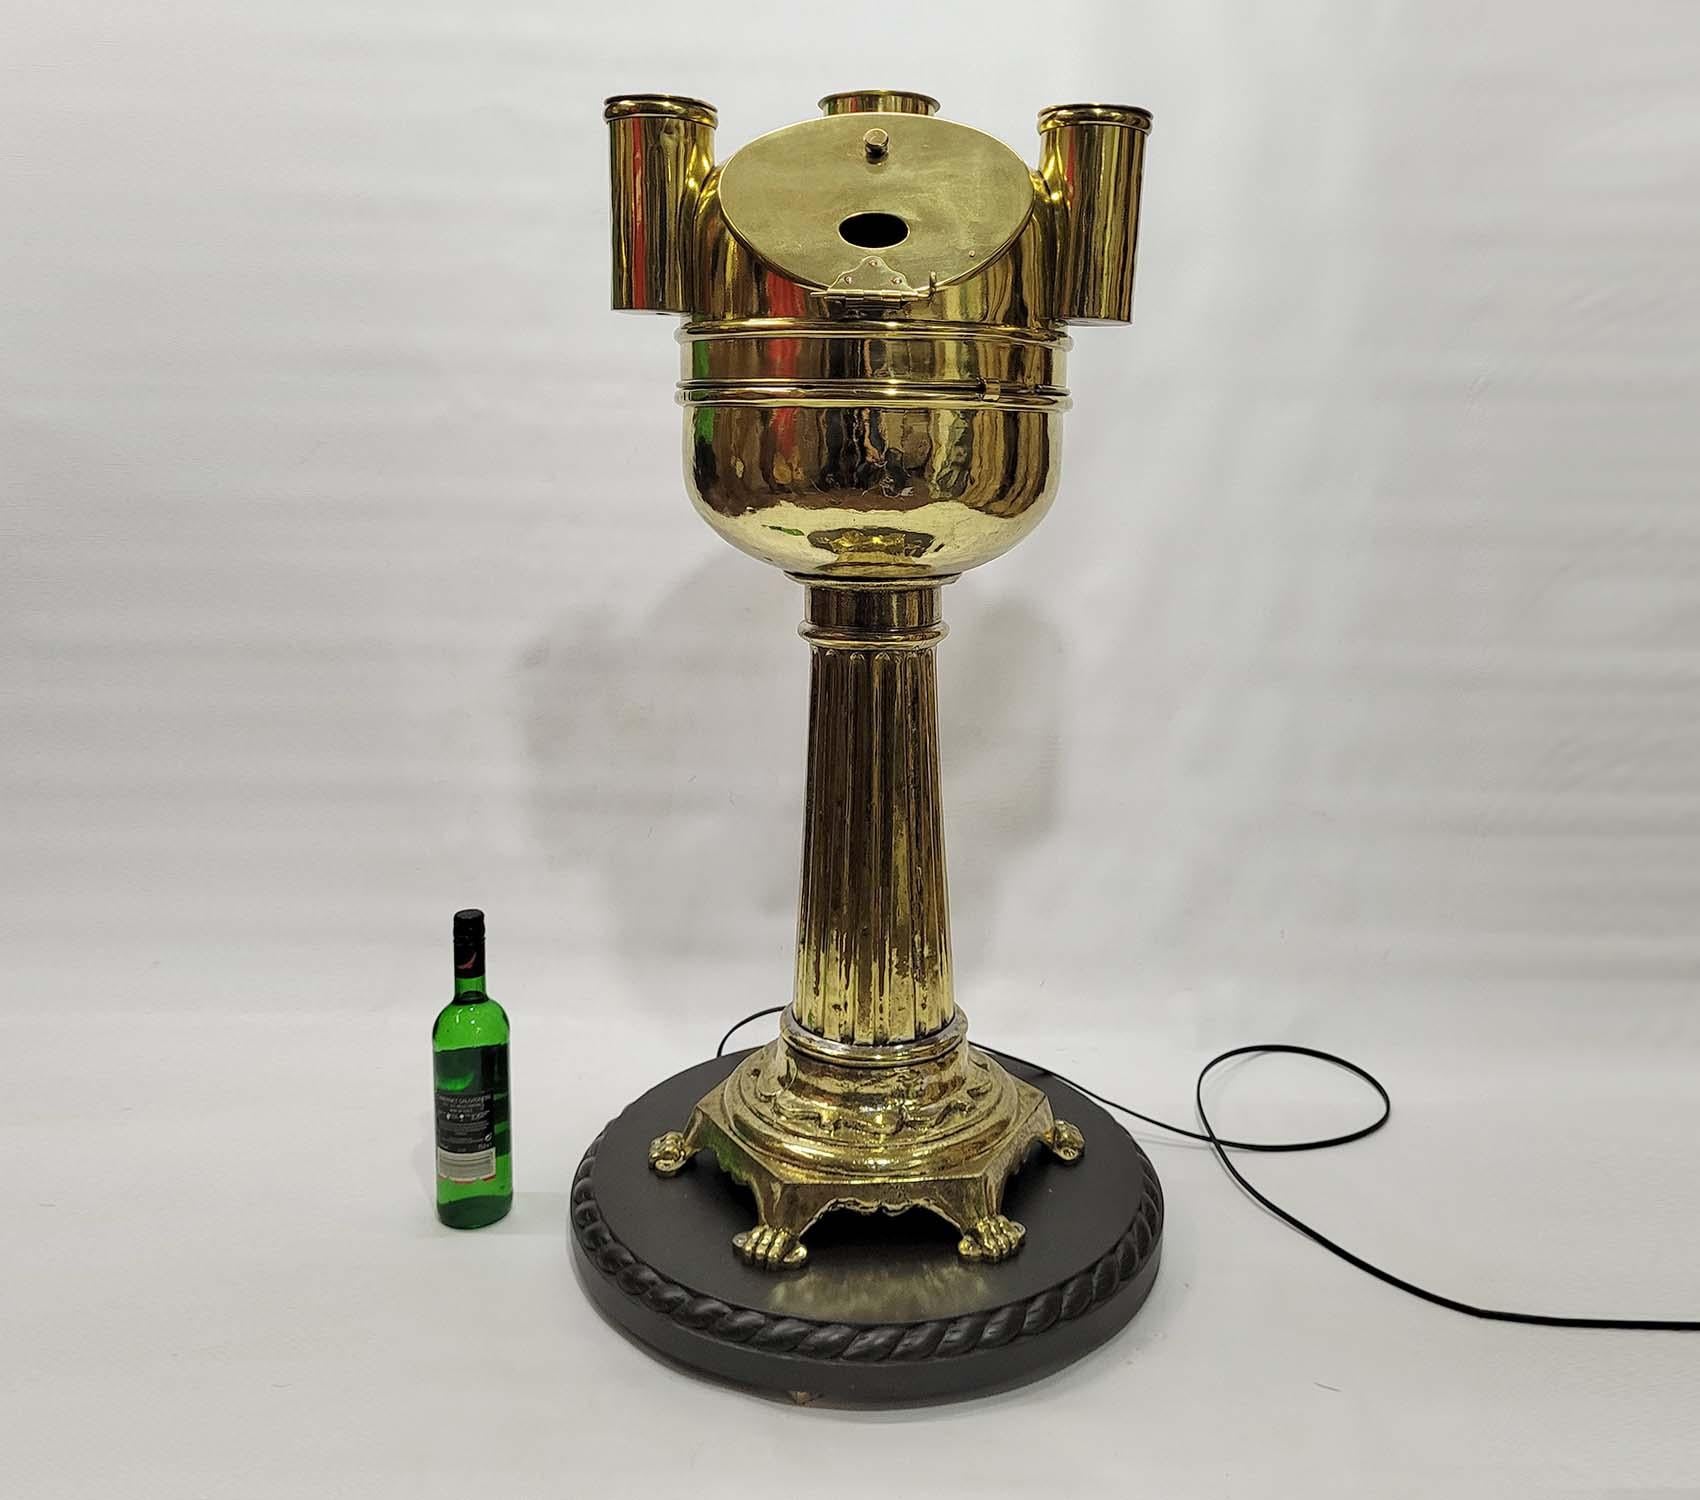 Turn of the century solid brass yacht binnacle. Pedestal base design with great detail on the graduated column and flange footed base. The hood has a hinged door with viewing port. The bowl holds a gimballed compass from American maker Kelvin and